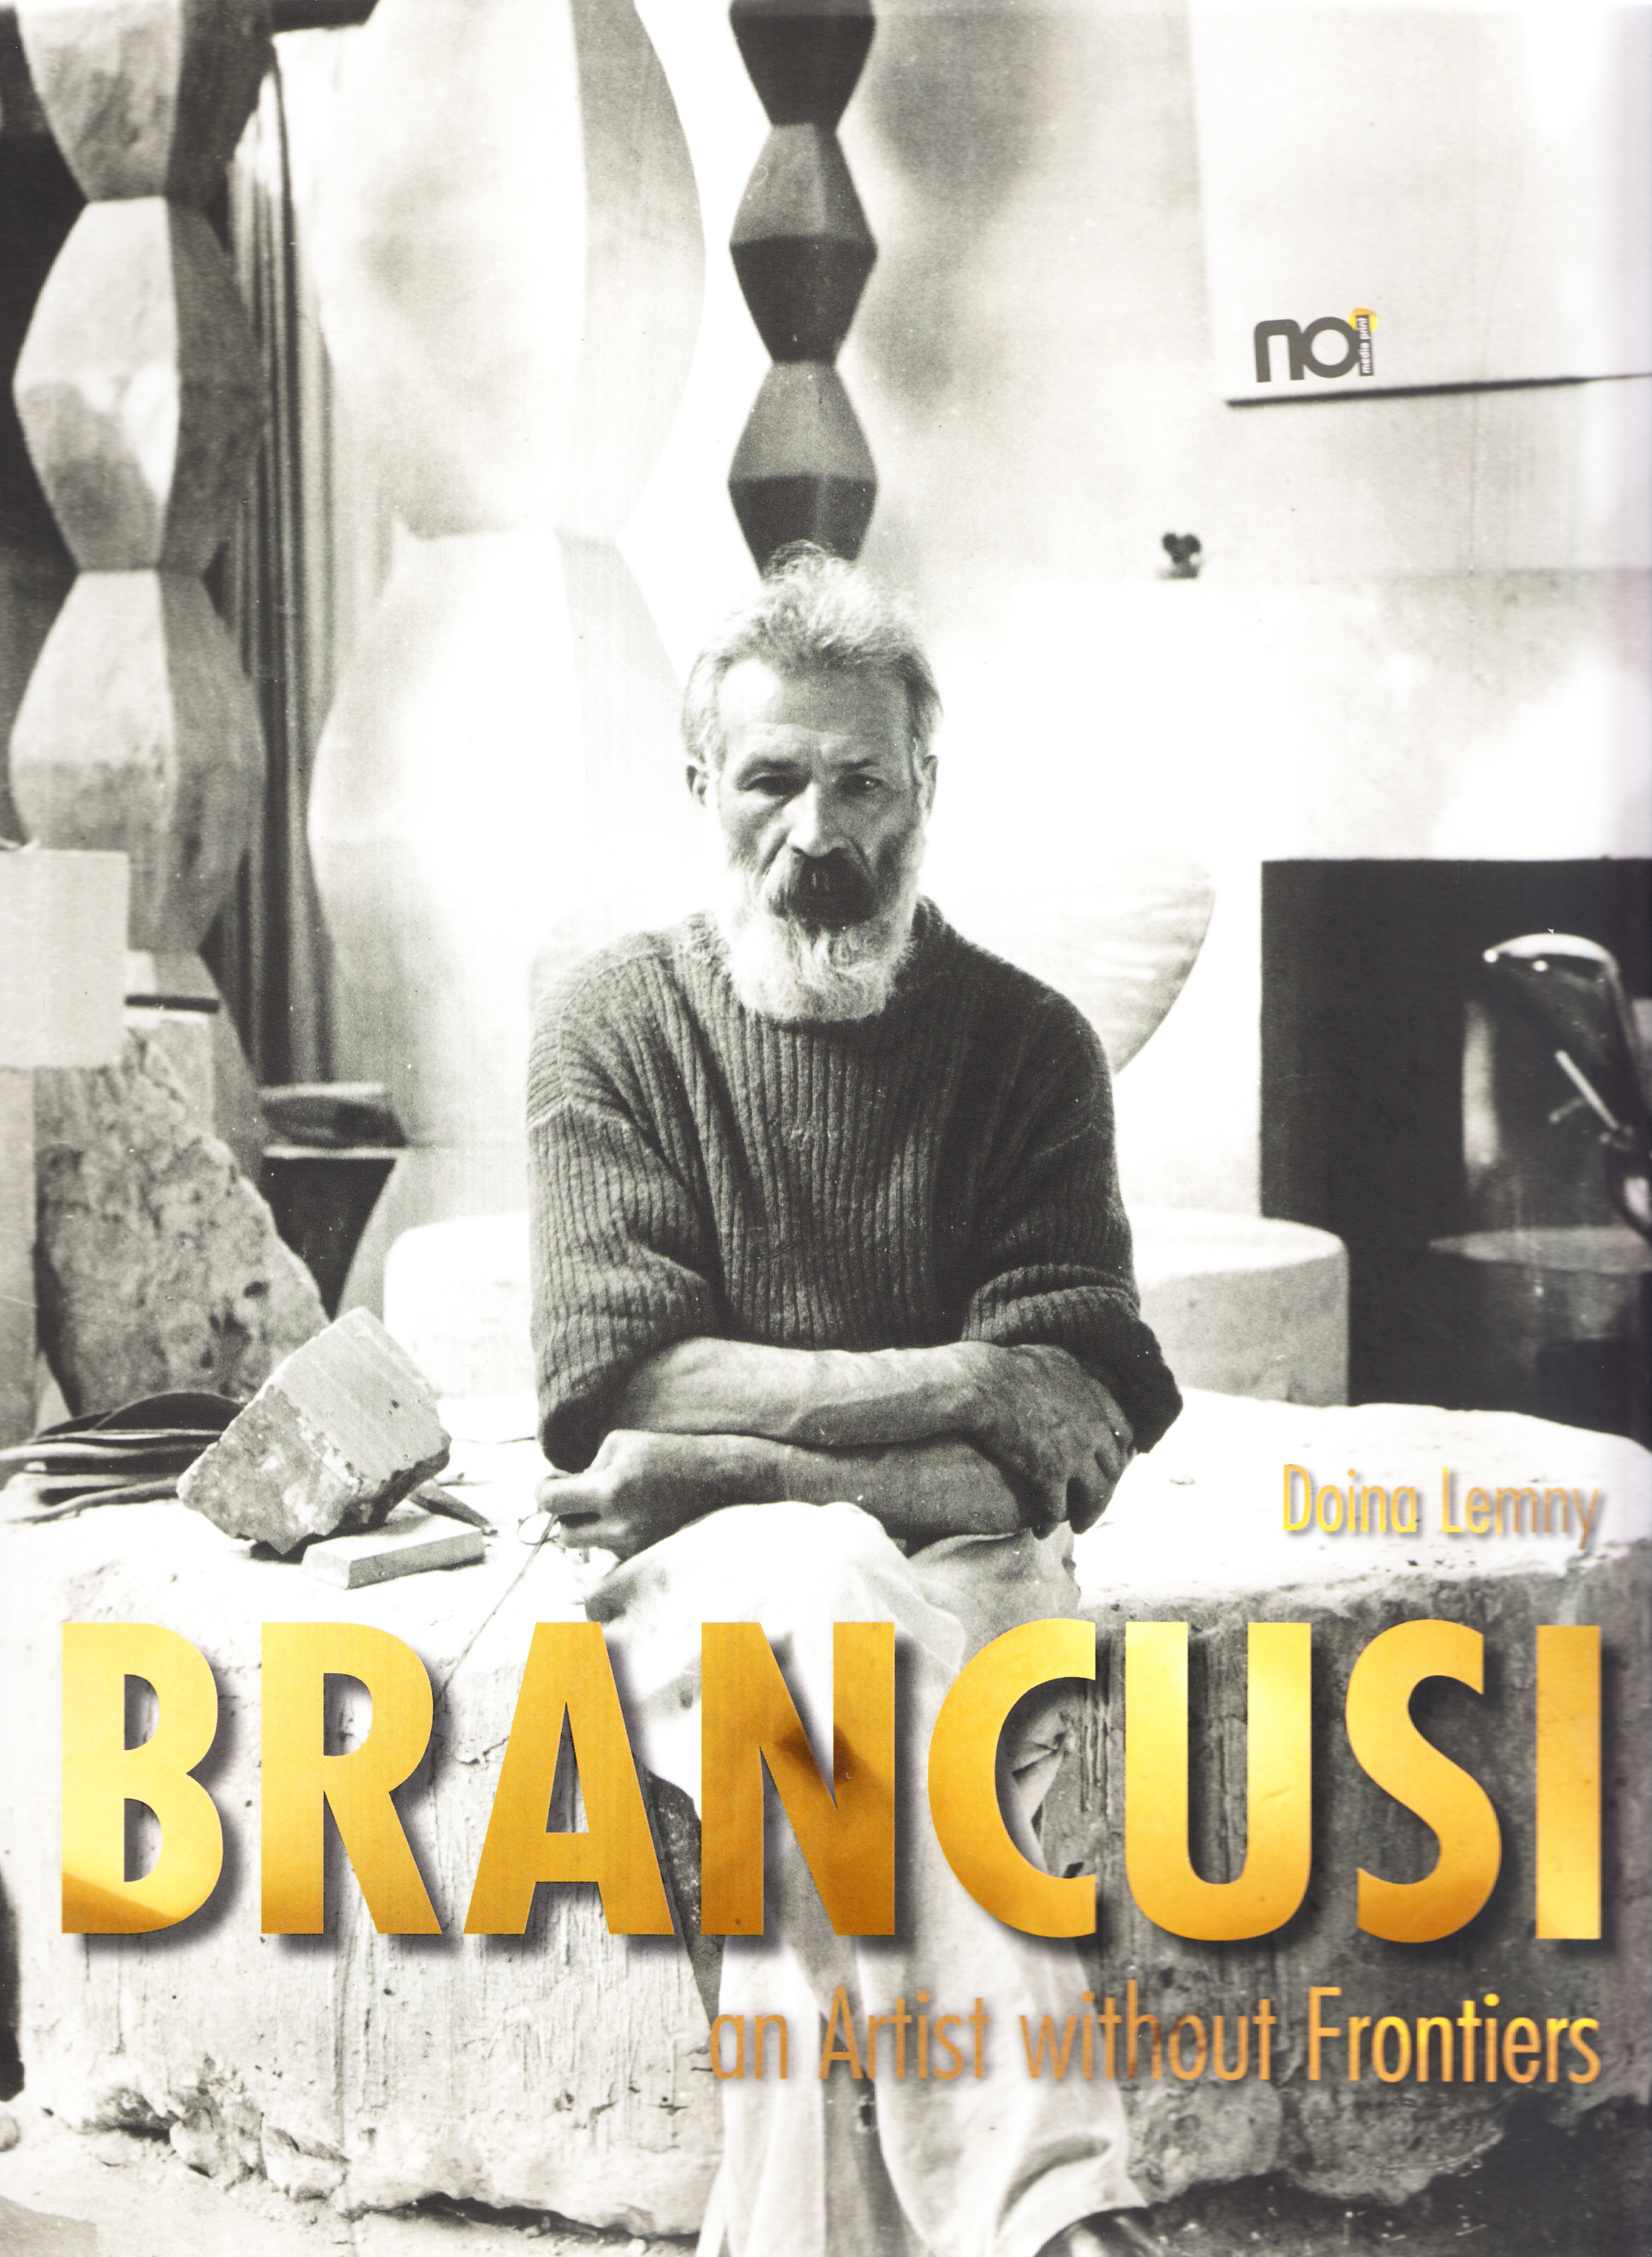 Brancusi, an Artist without Frontiers - Doina Lemny